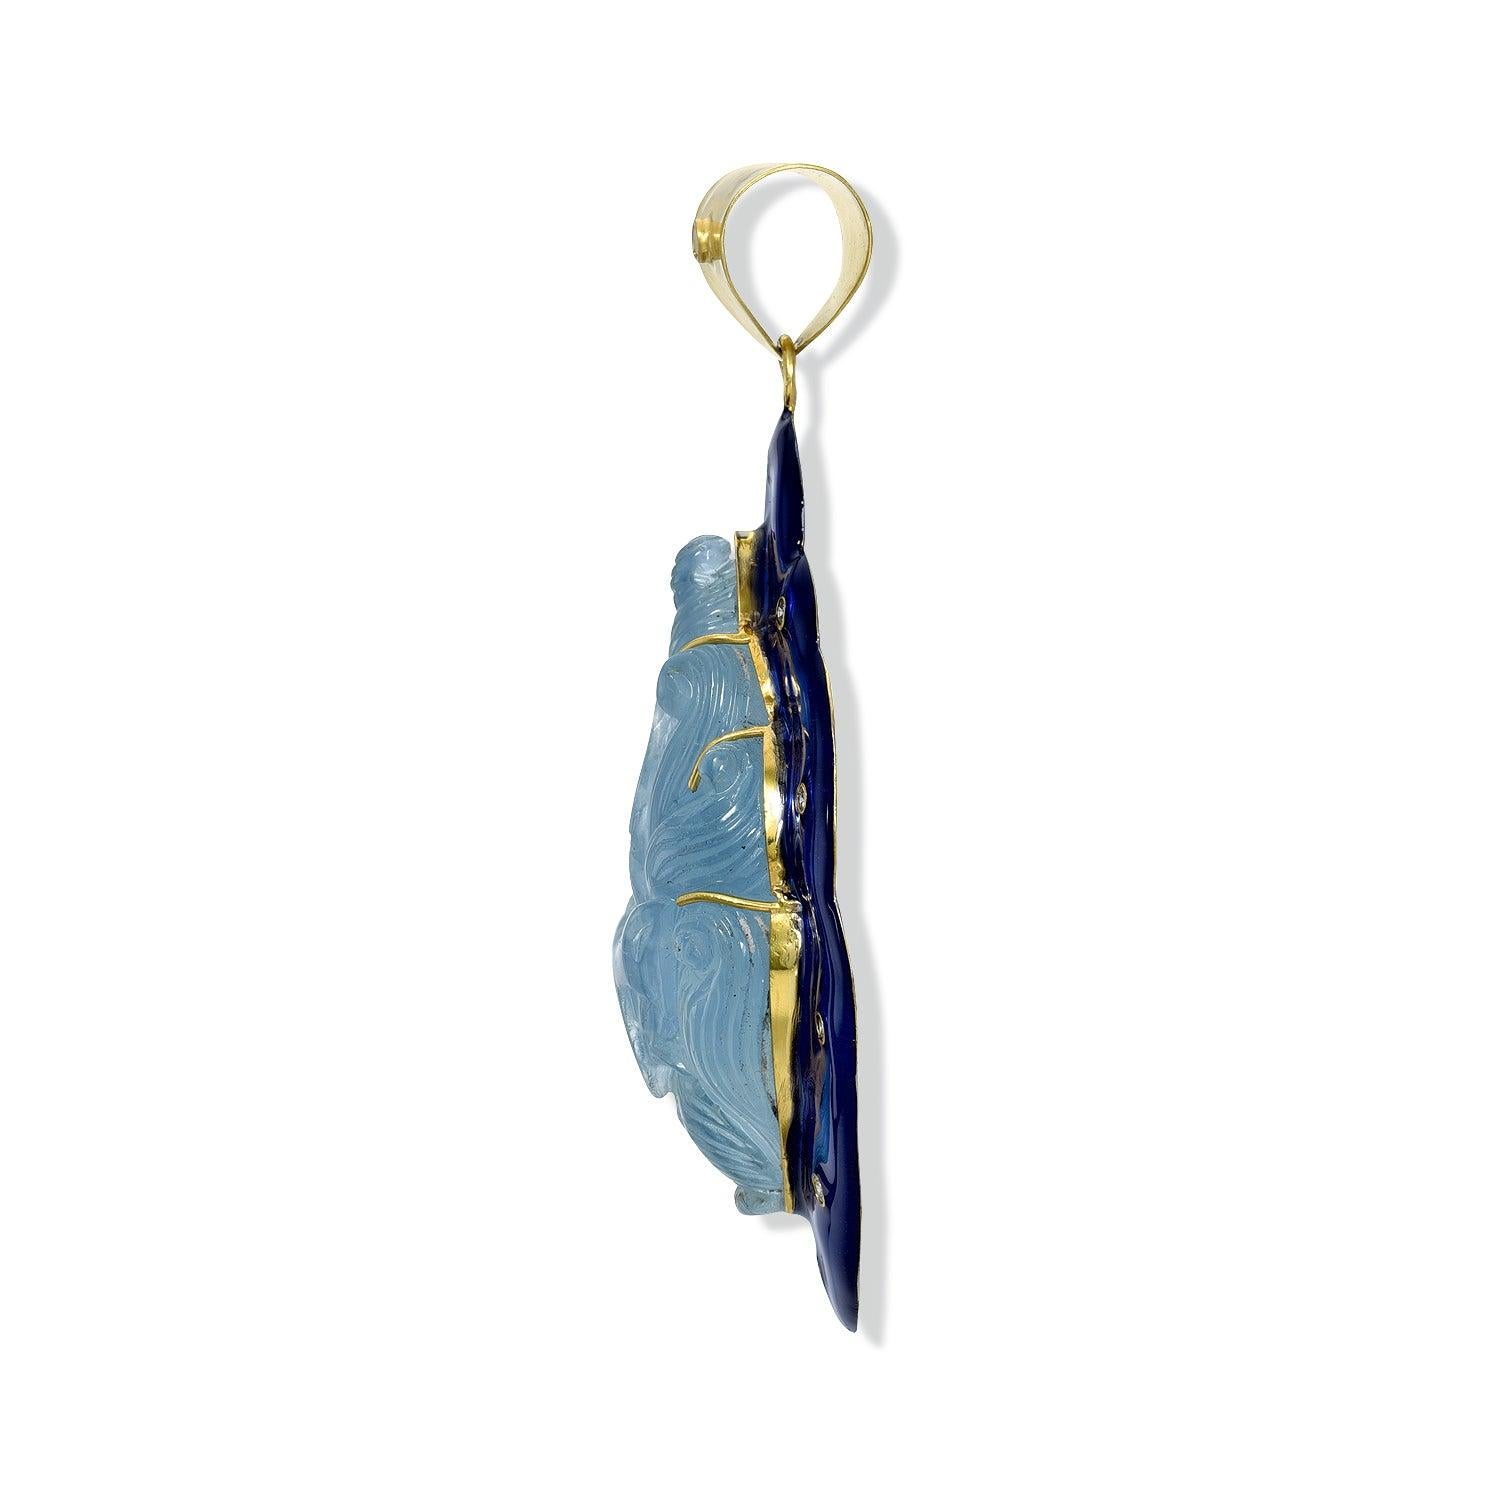 This classic floral carving enamel pendant features aquamarine carved details and a bright blue enamel finish. It gives you that perfect elegant touch, perfect for special occasions and gift giving.